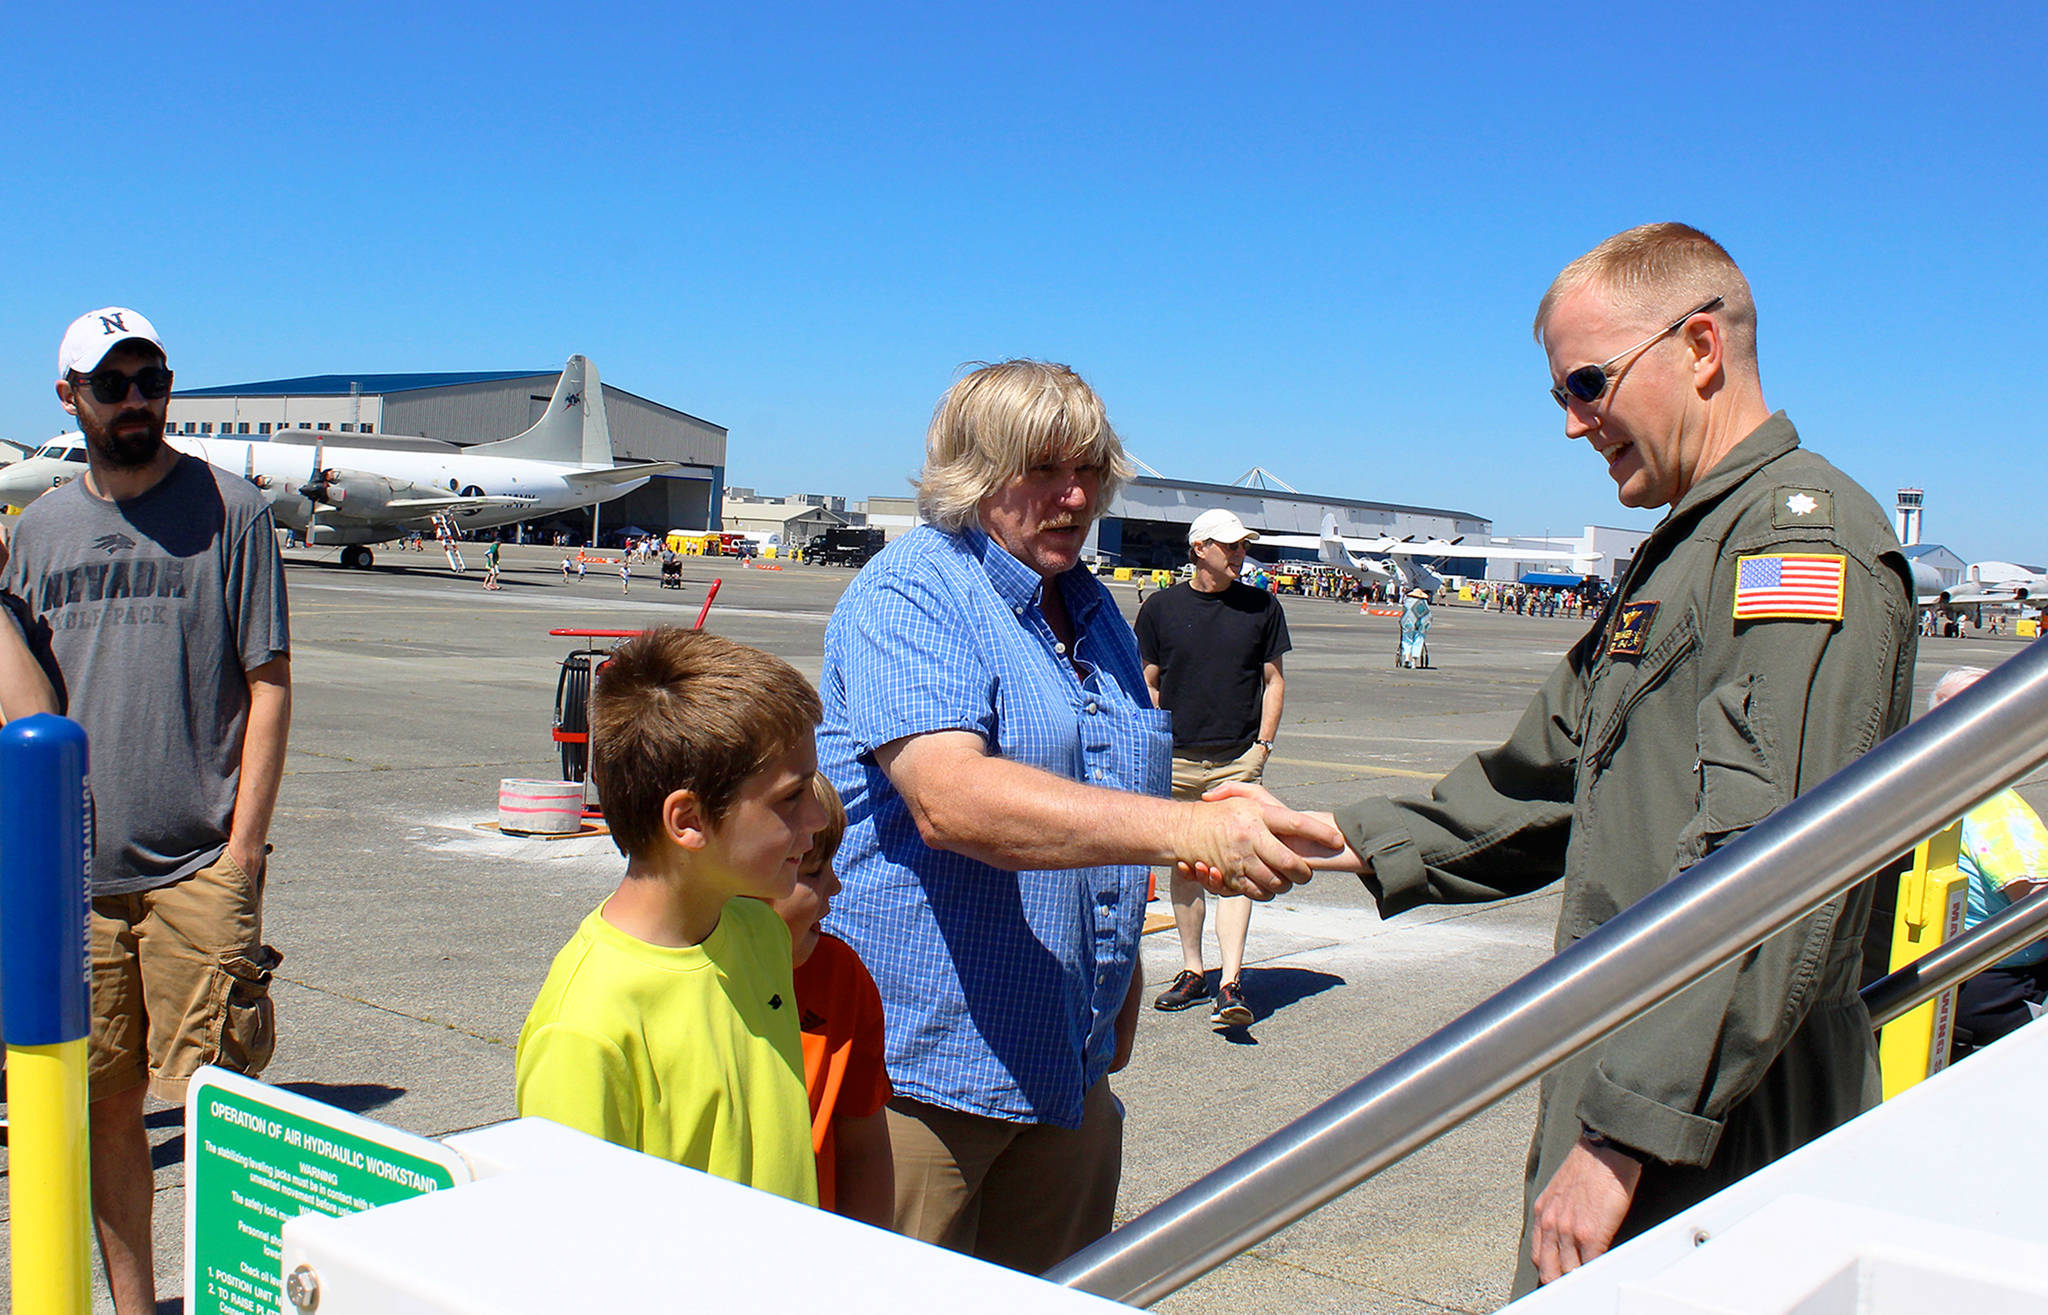 At Saturday’s NAS Whidbey Island Open House, a long line formed to get a peek inside the Navy’s brand new jet, Poseidon P-BA, just delivered from Boeing. Greeting visitors at the Poseidon entrance is Cmdr. Bryan Hager.                                Photo by Patricia Guthrie/Whidbey News-Times